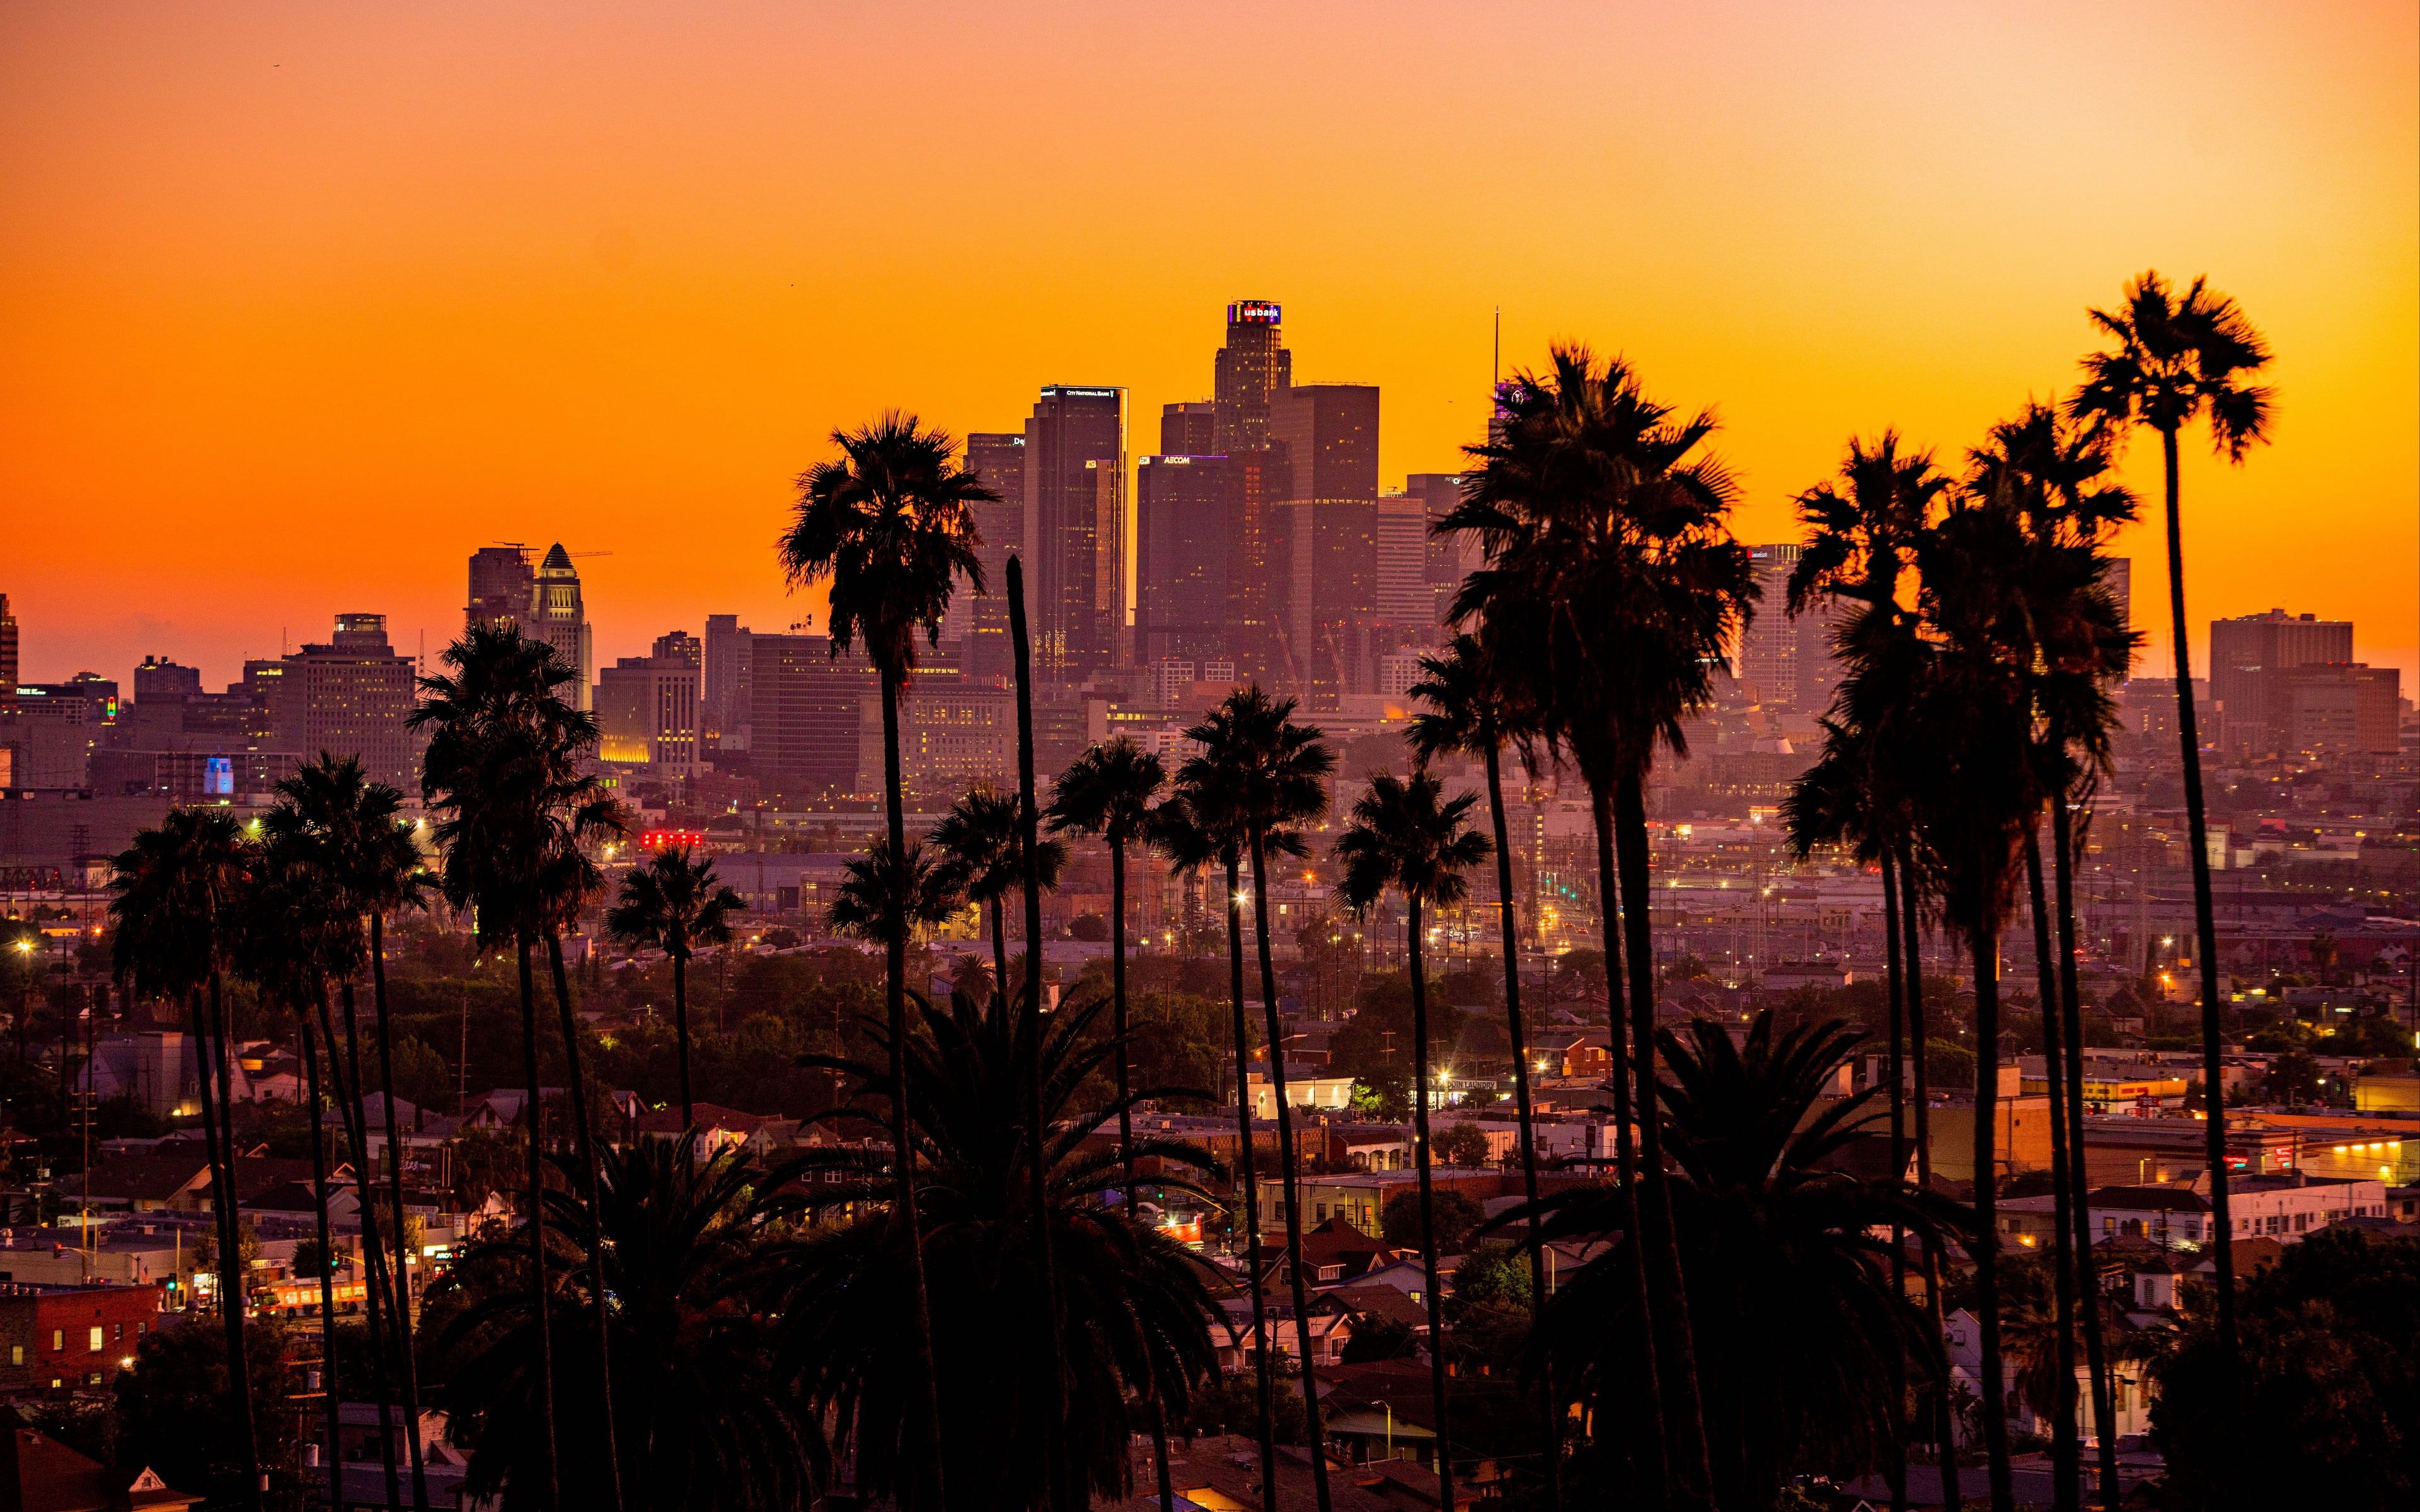 The Los Angeles skyline with palm trees in the foreground. - Los Angeles, California